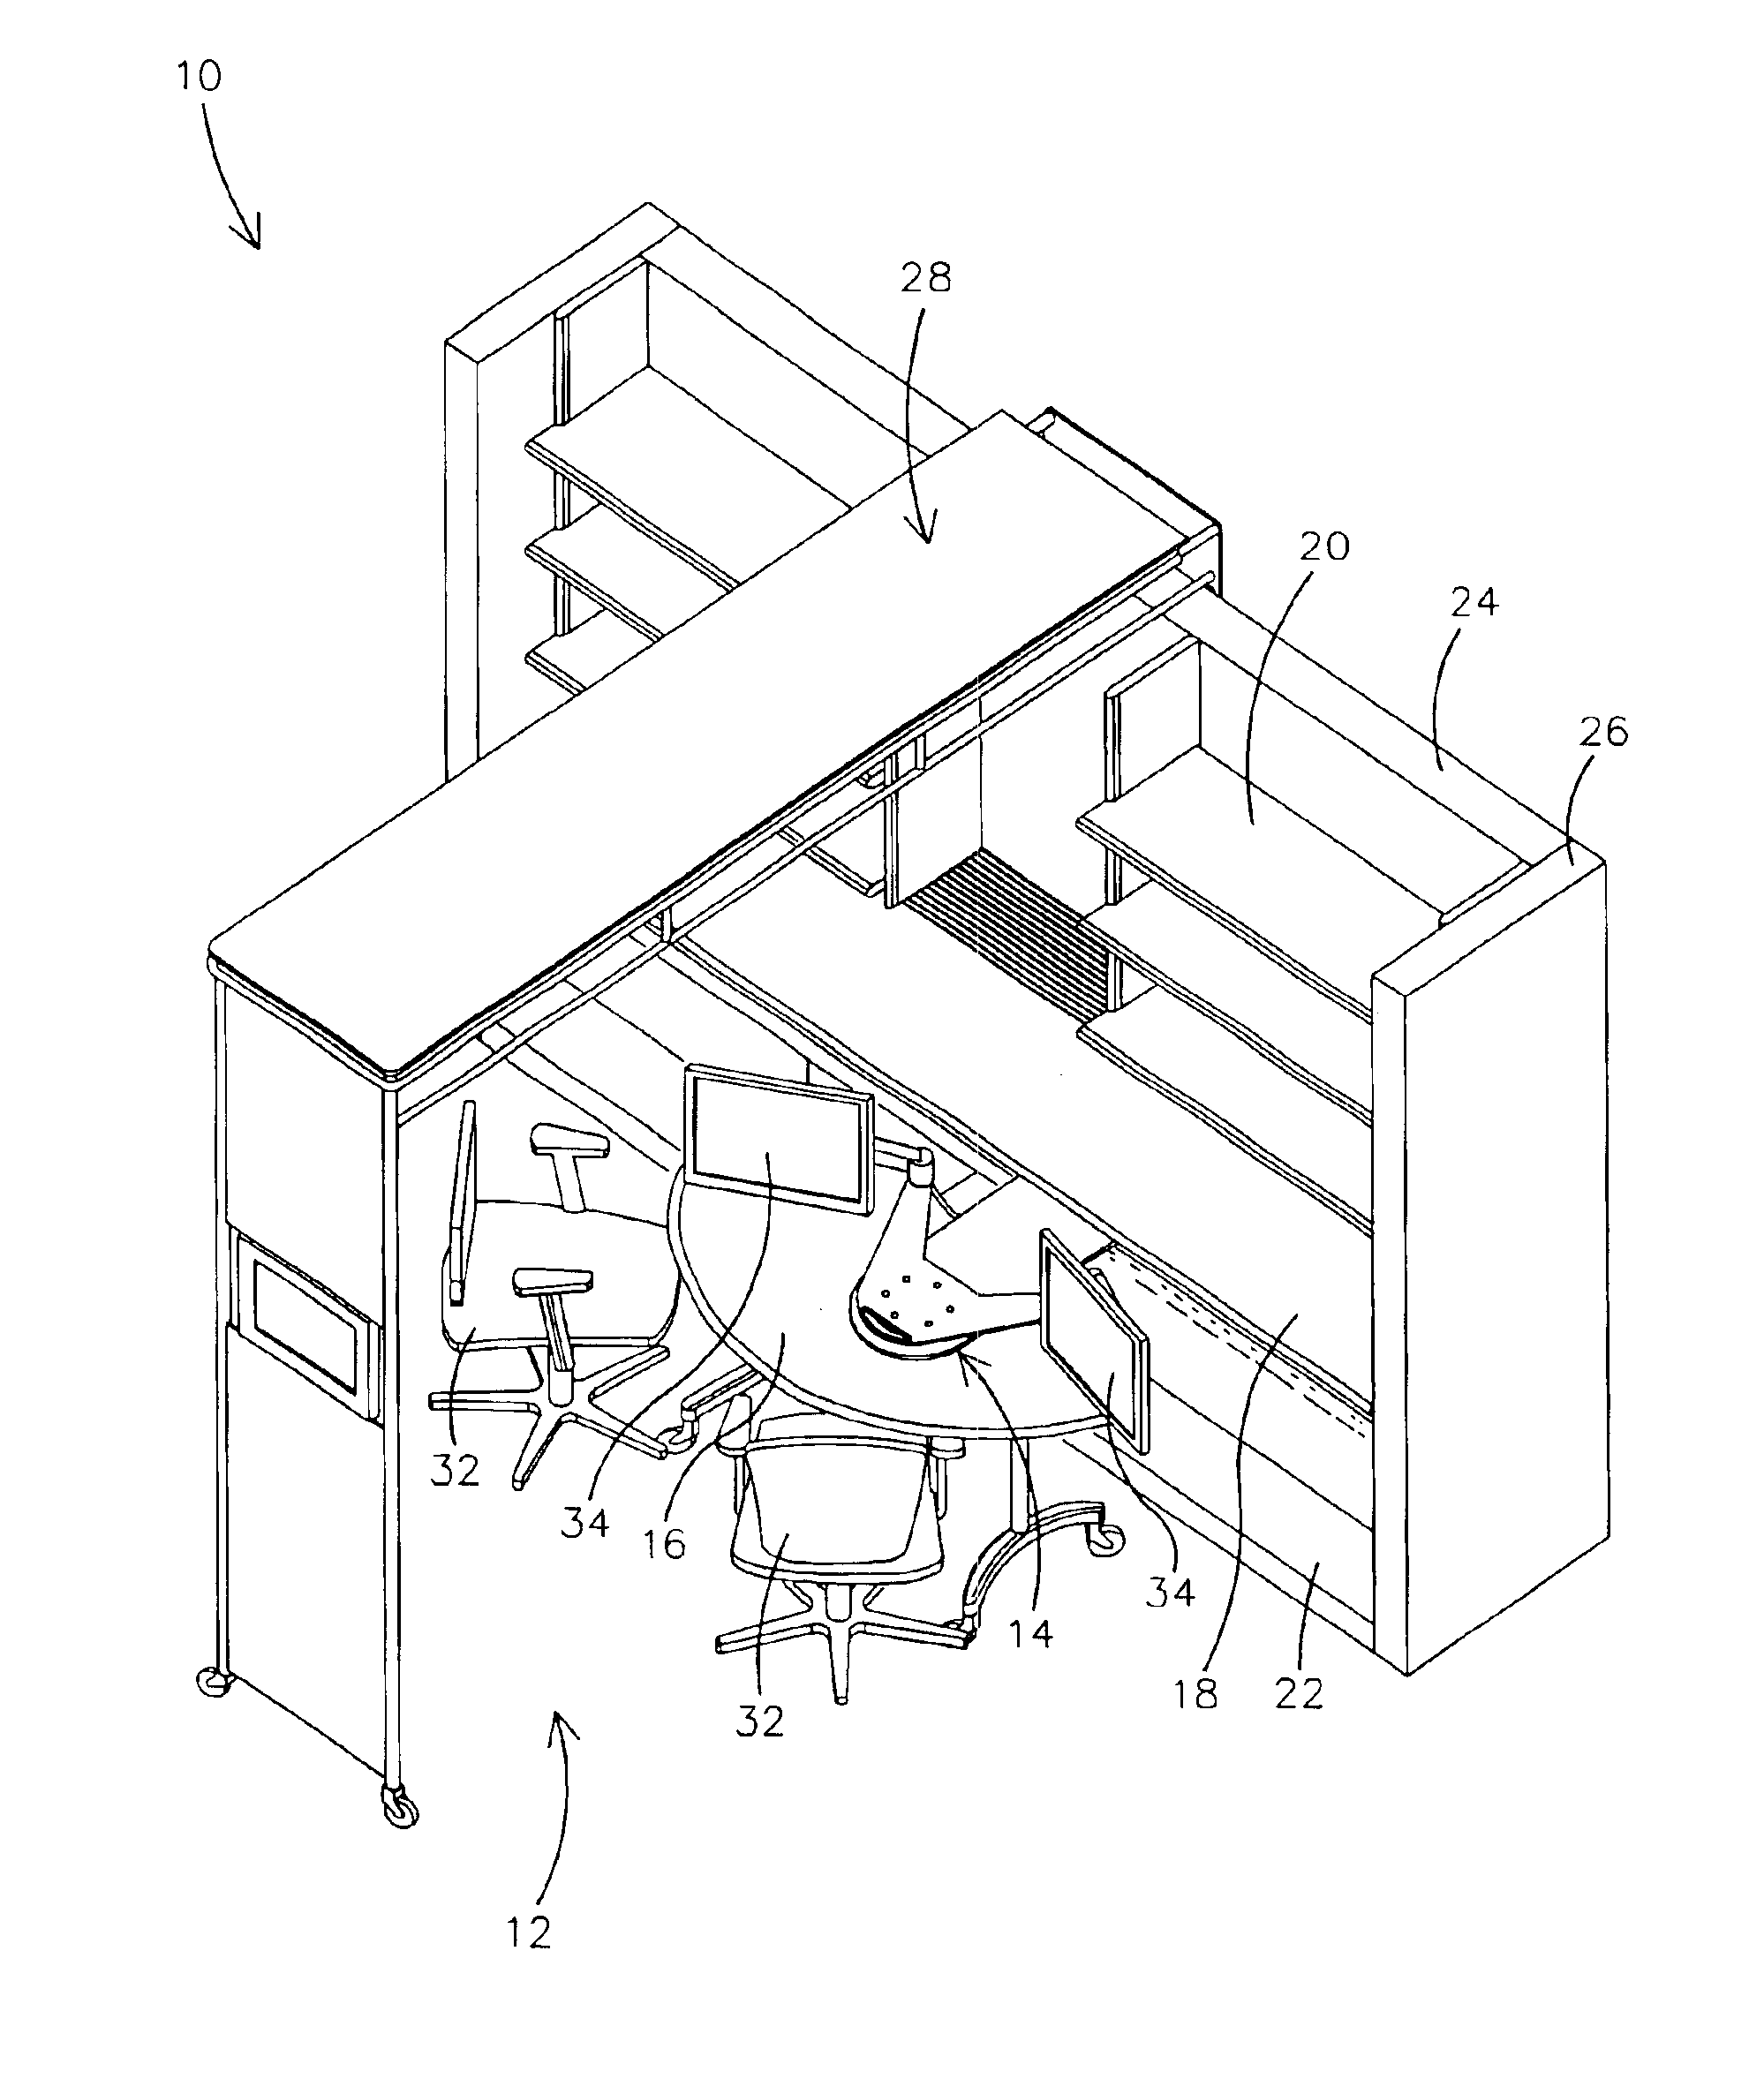 Movable display support system